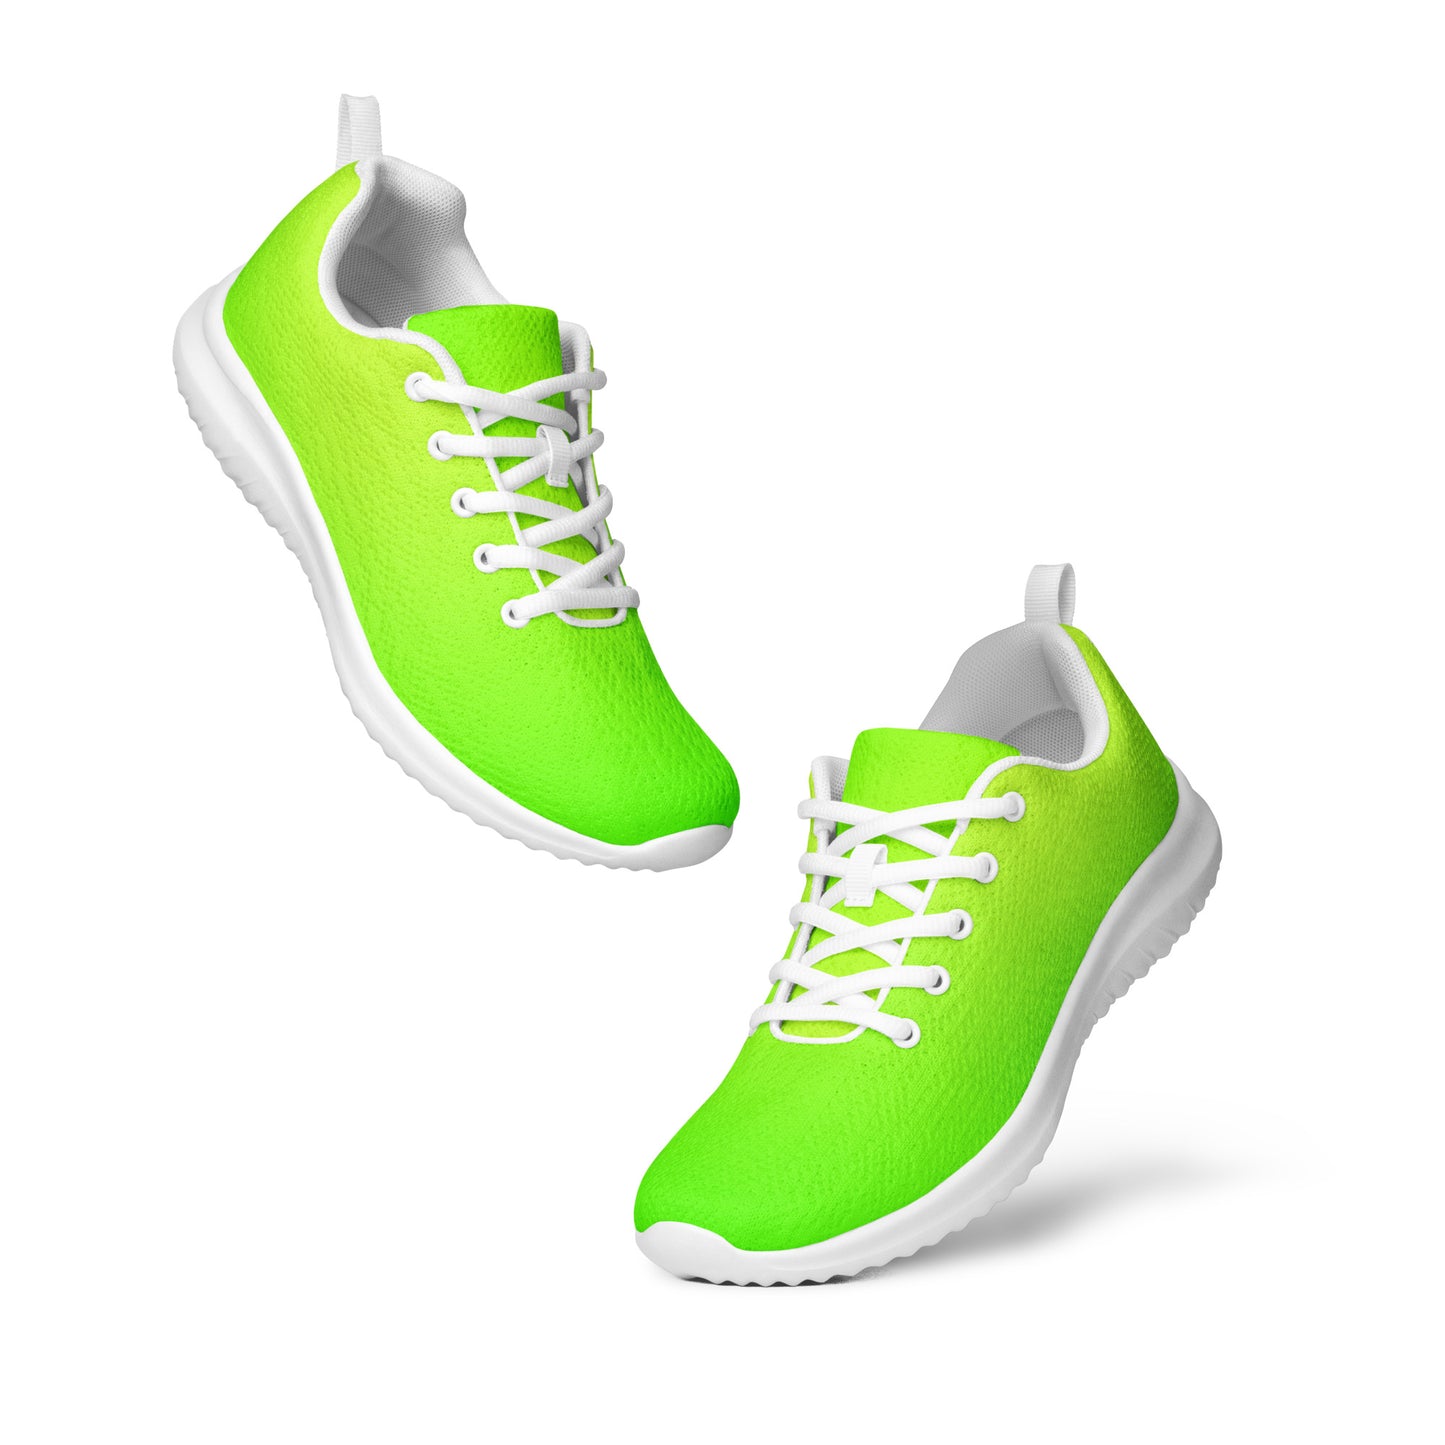 DASH Lime Green Women’s Athletic Shoes Lightweight Breathable Design by IOBI Original Apparel